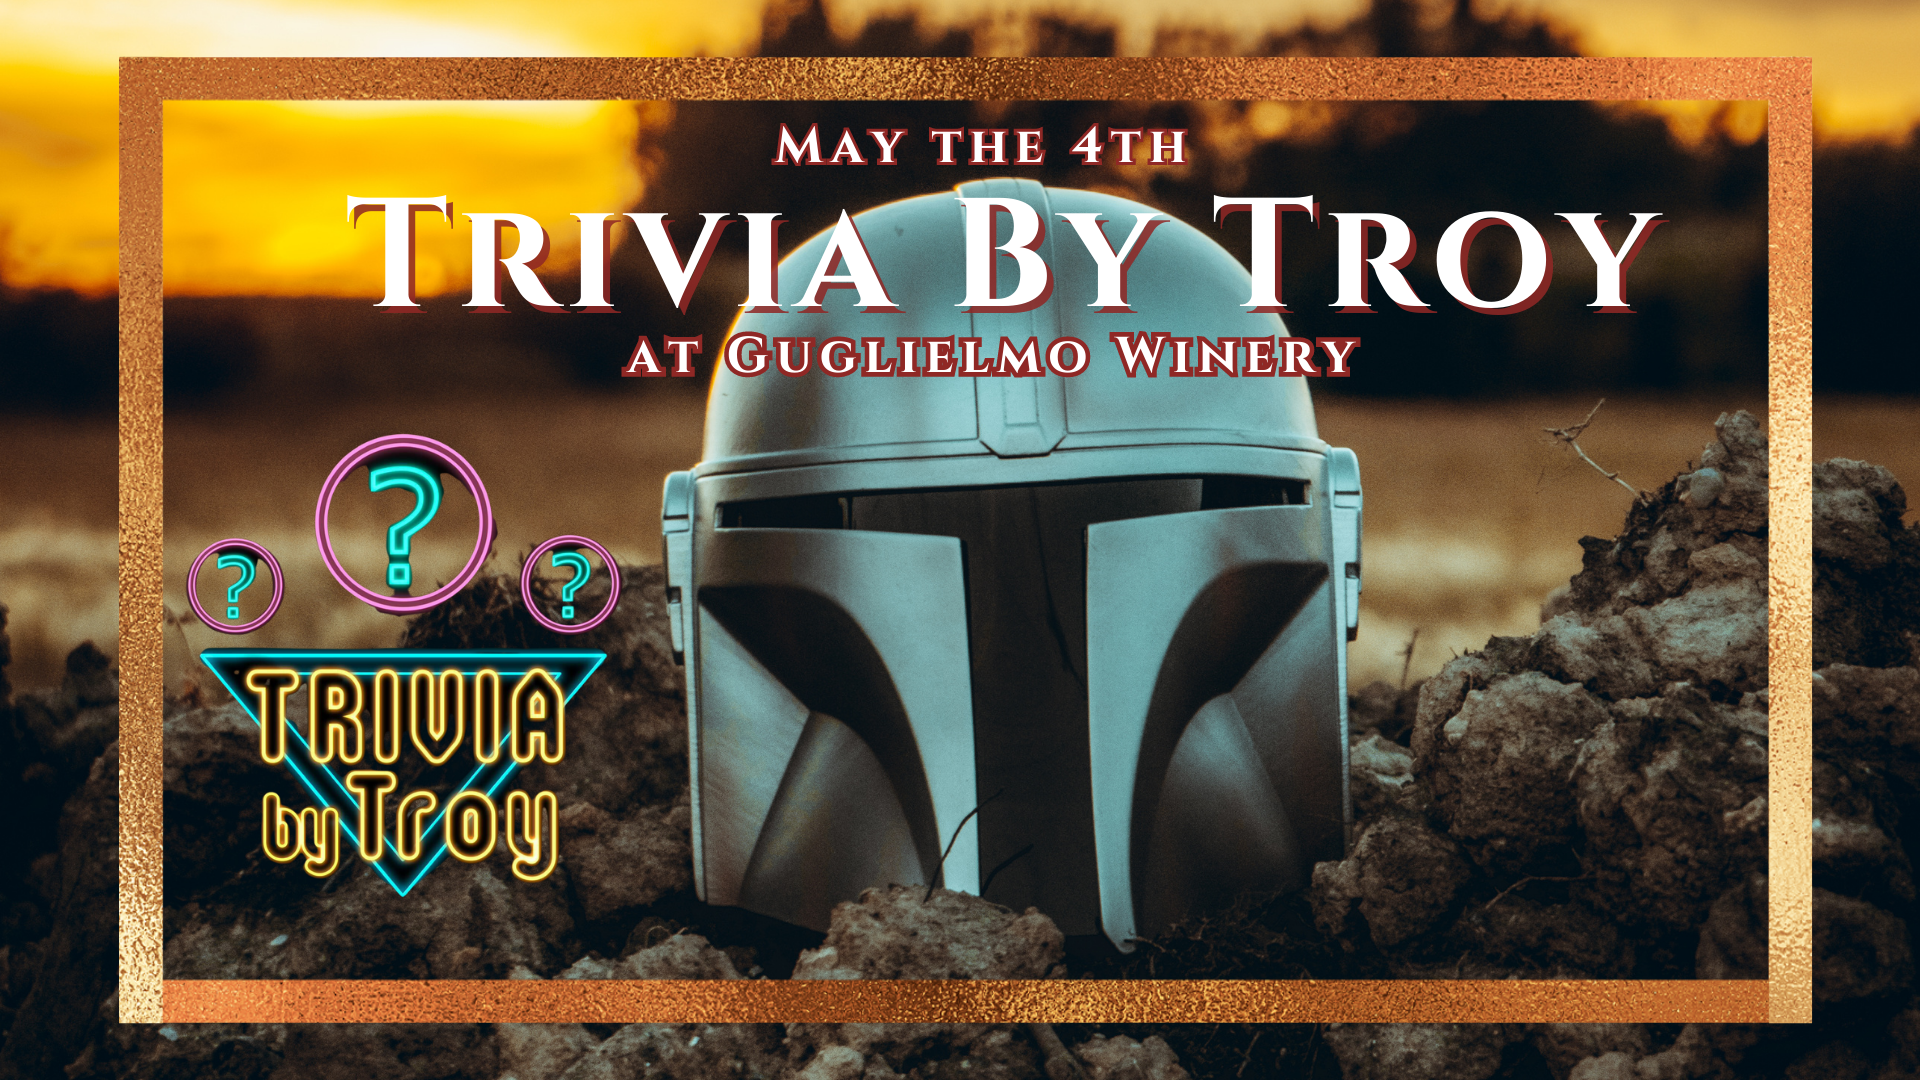 Trivia By Troy May 4th